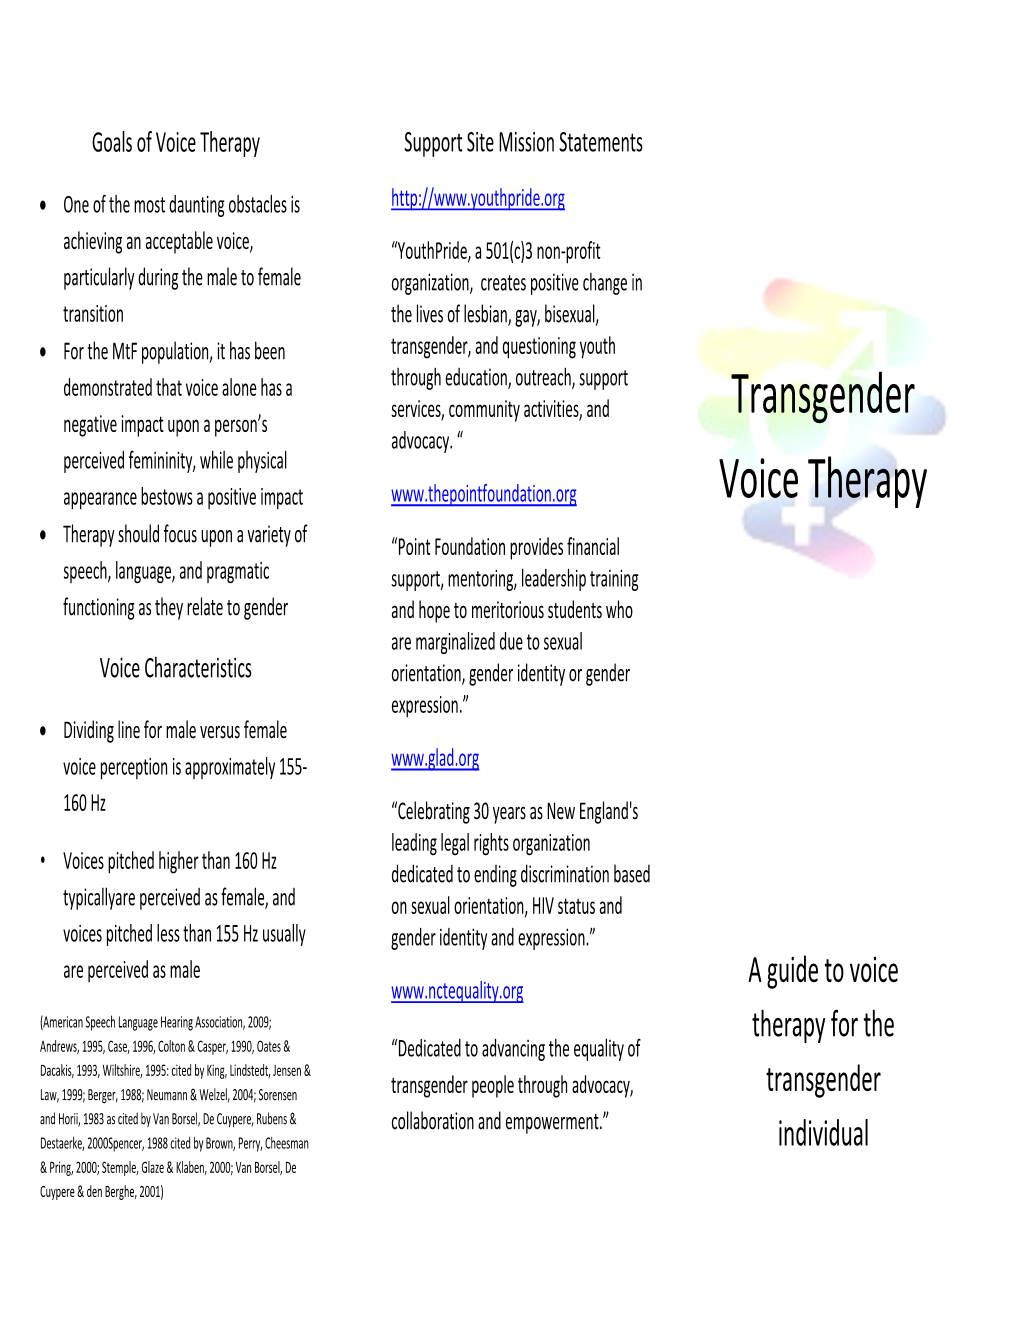 Transgender Voice Therapy